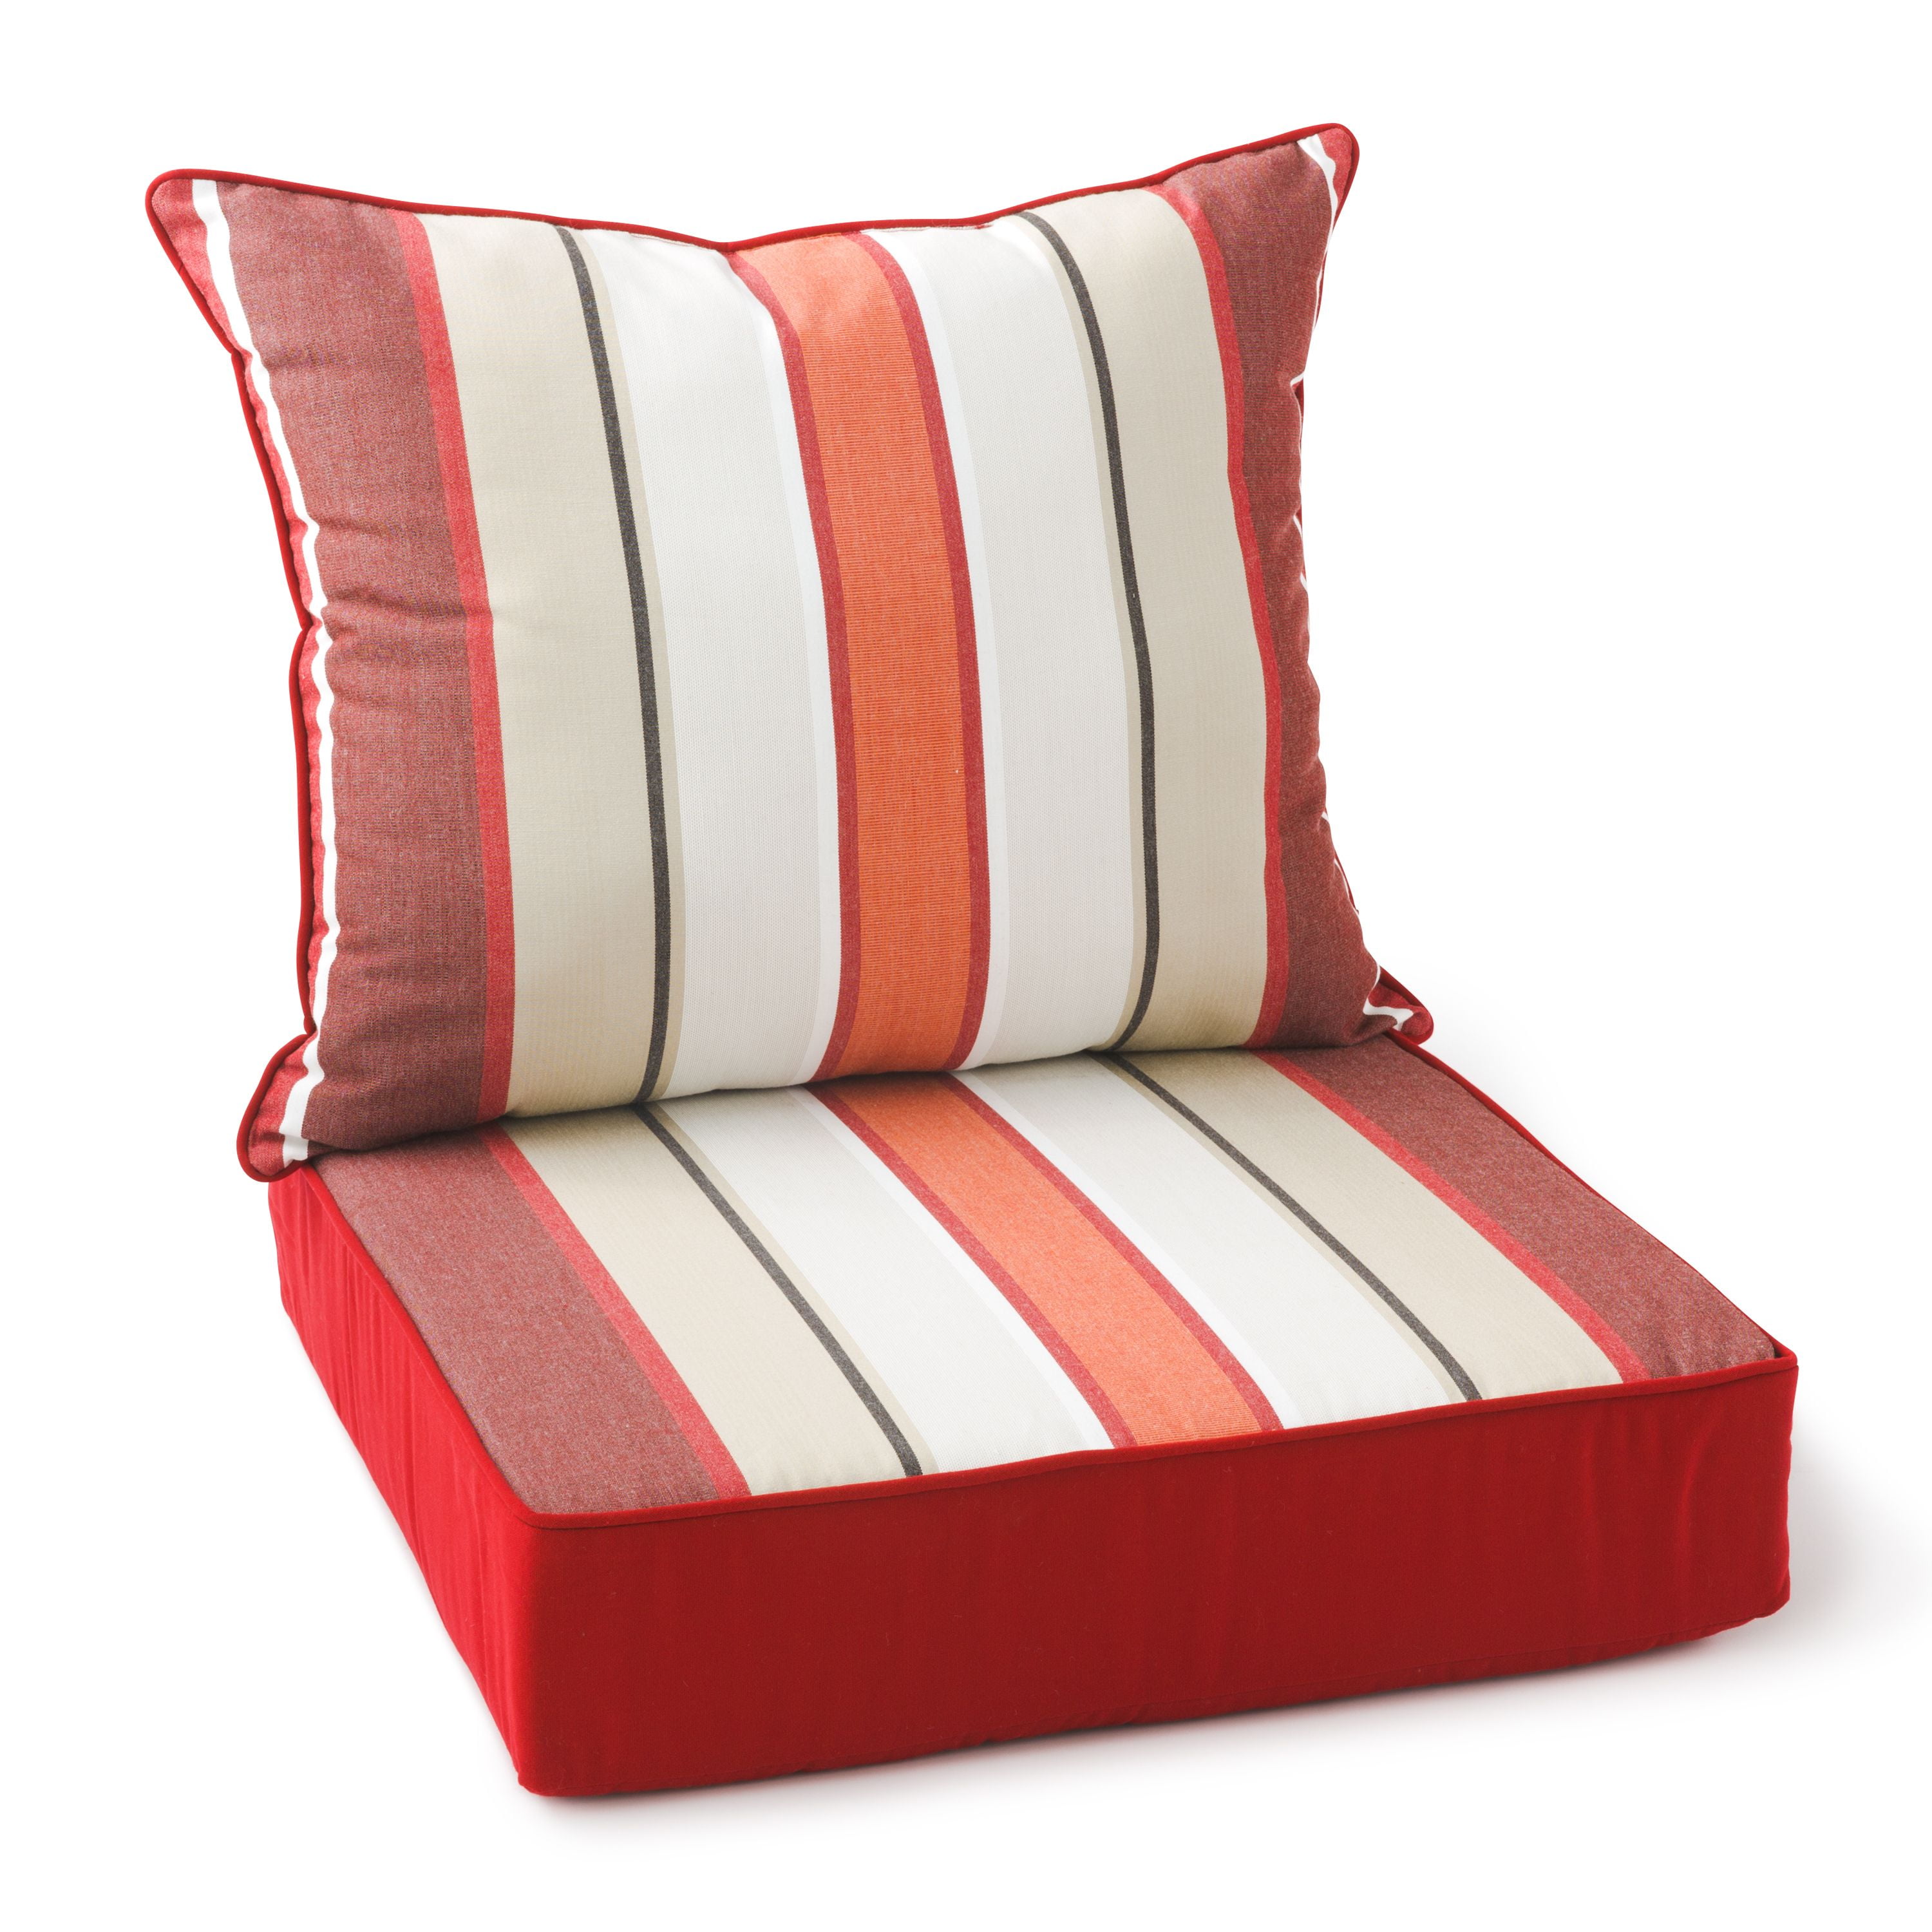 Better Homes & Gardens 2-Piece Striped Outdoor Lounge Chair Cushion